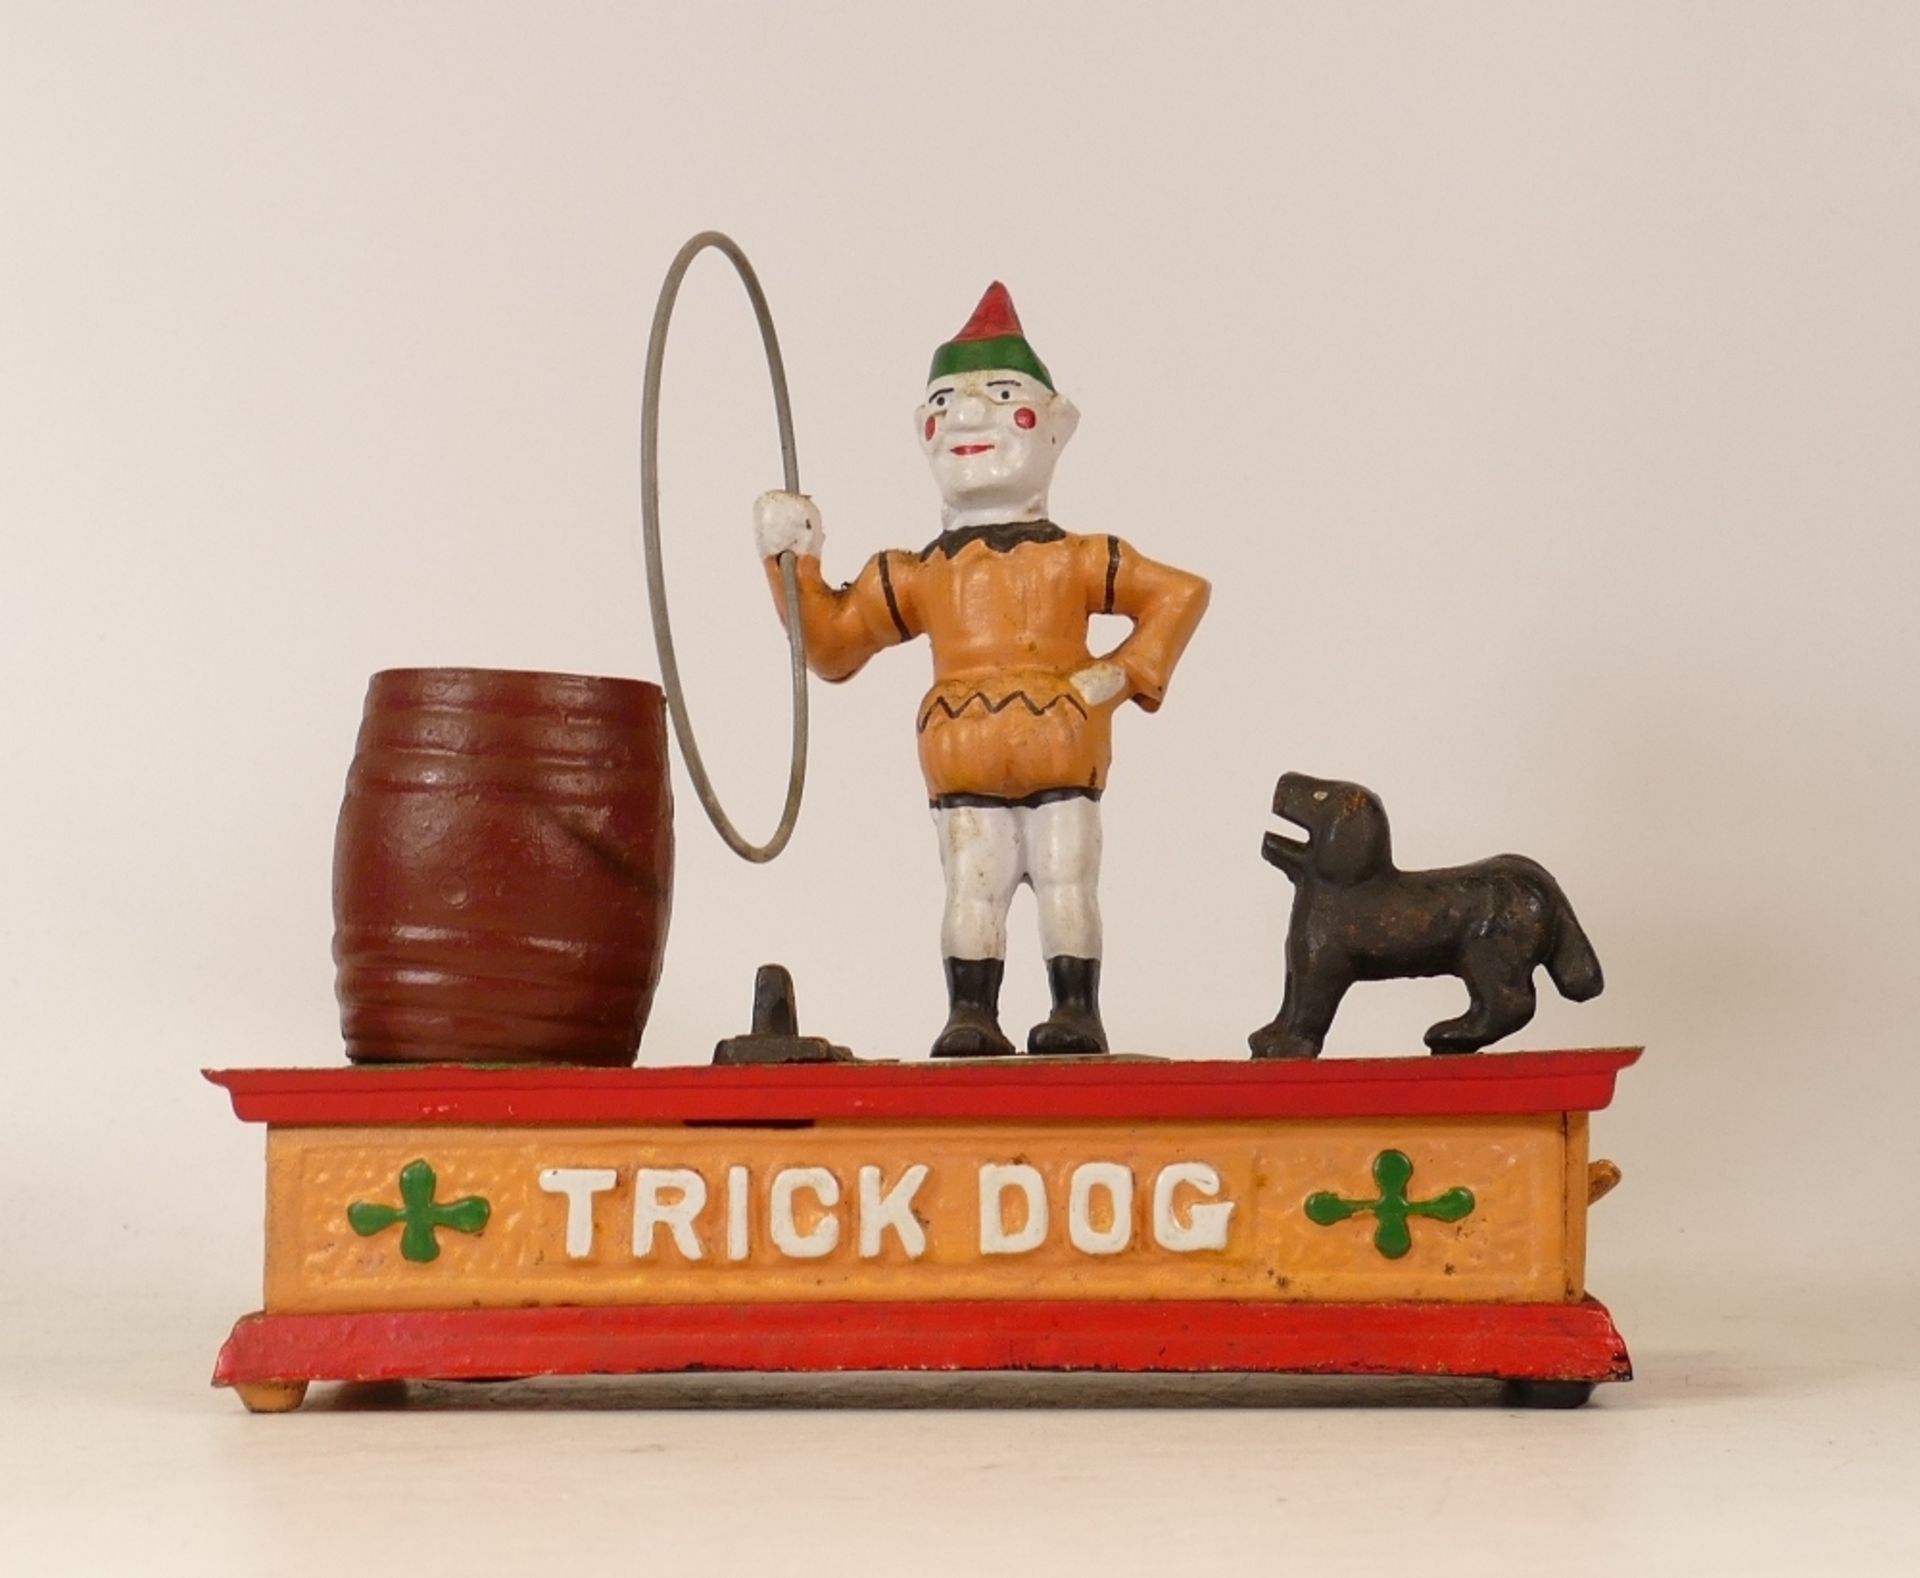 Early 20th century style cast iron money box of trick dog